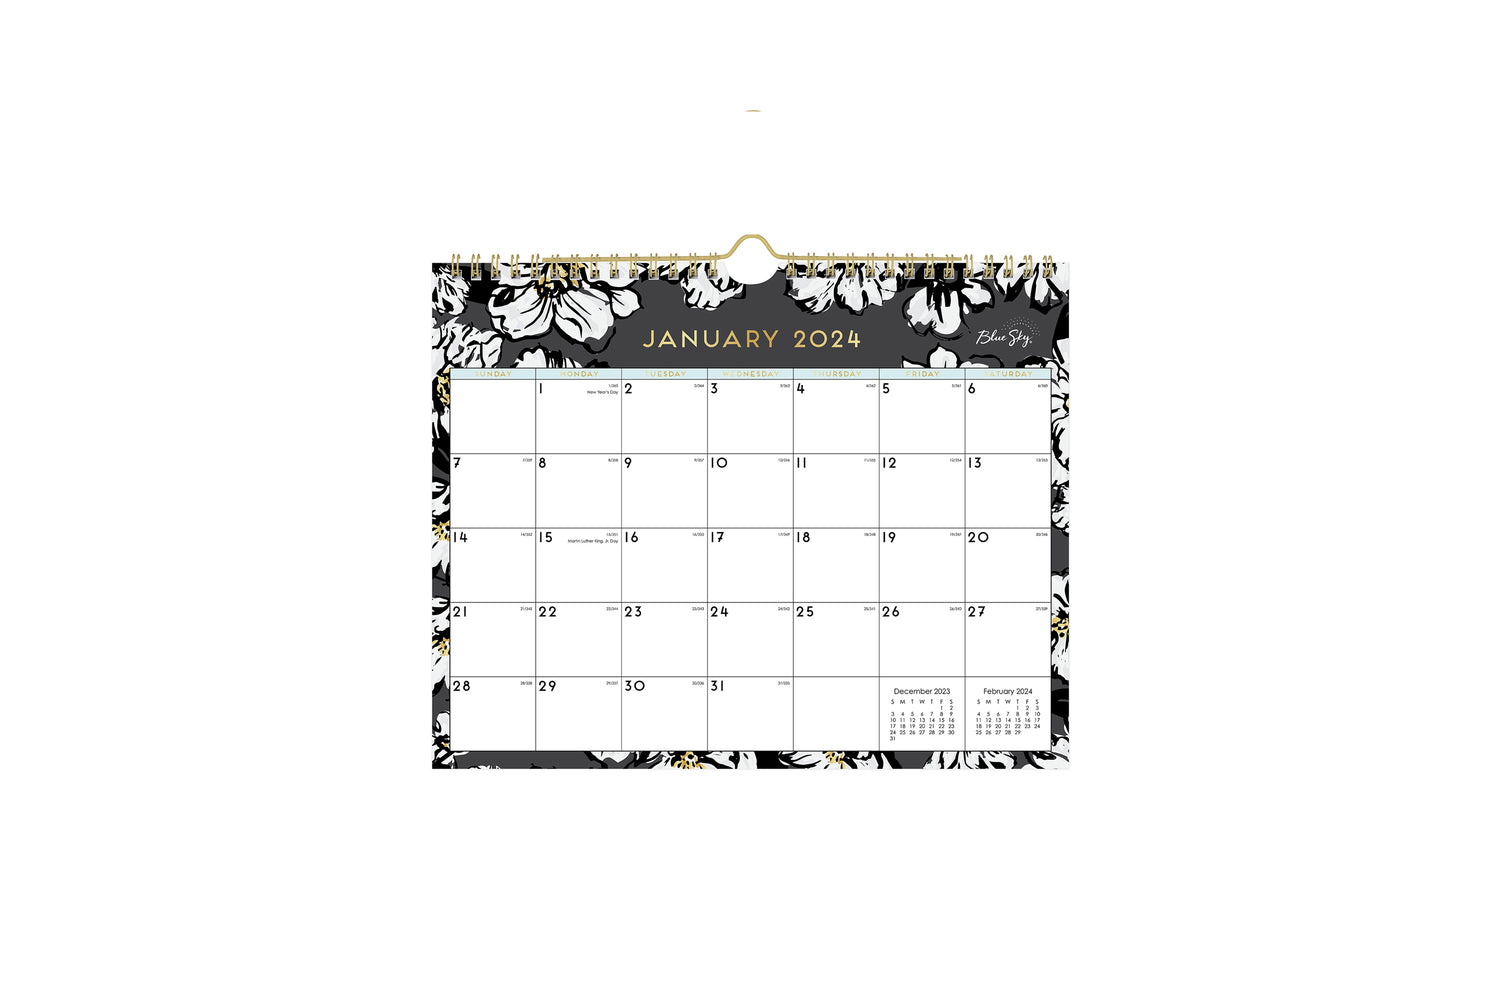 11x8.75 wall calendar for 2023 in baccara dark design featuring gold accents for months and days, black/grey background and white florals